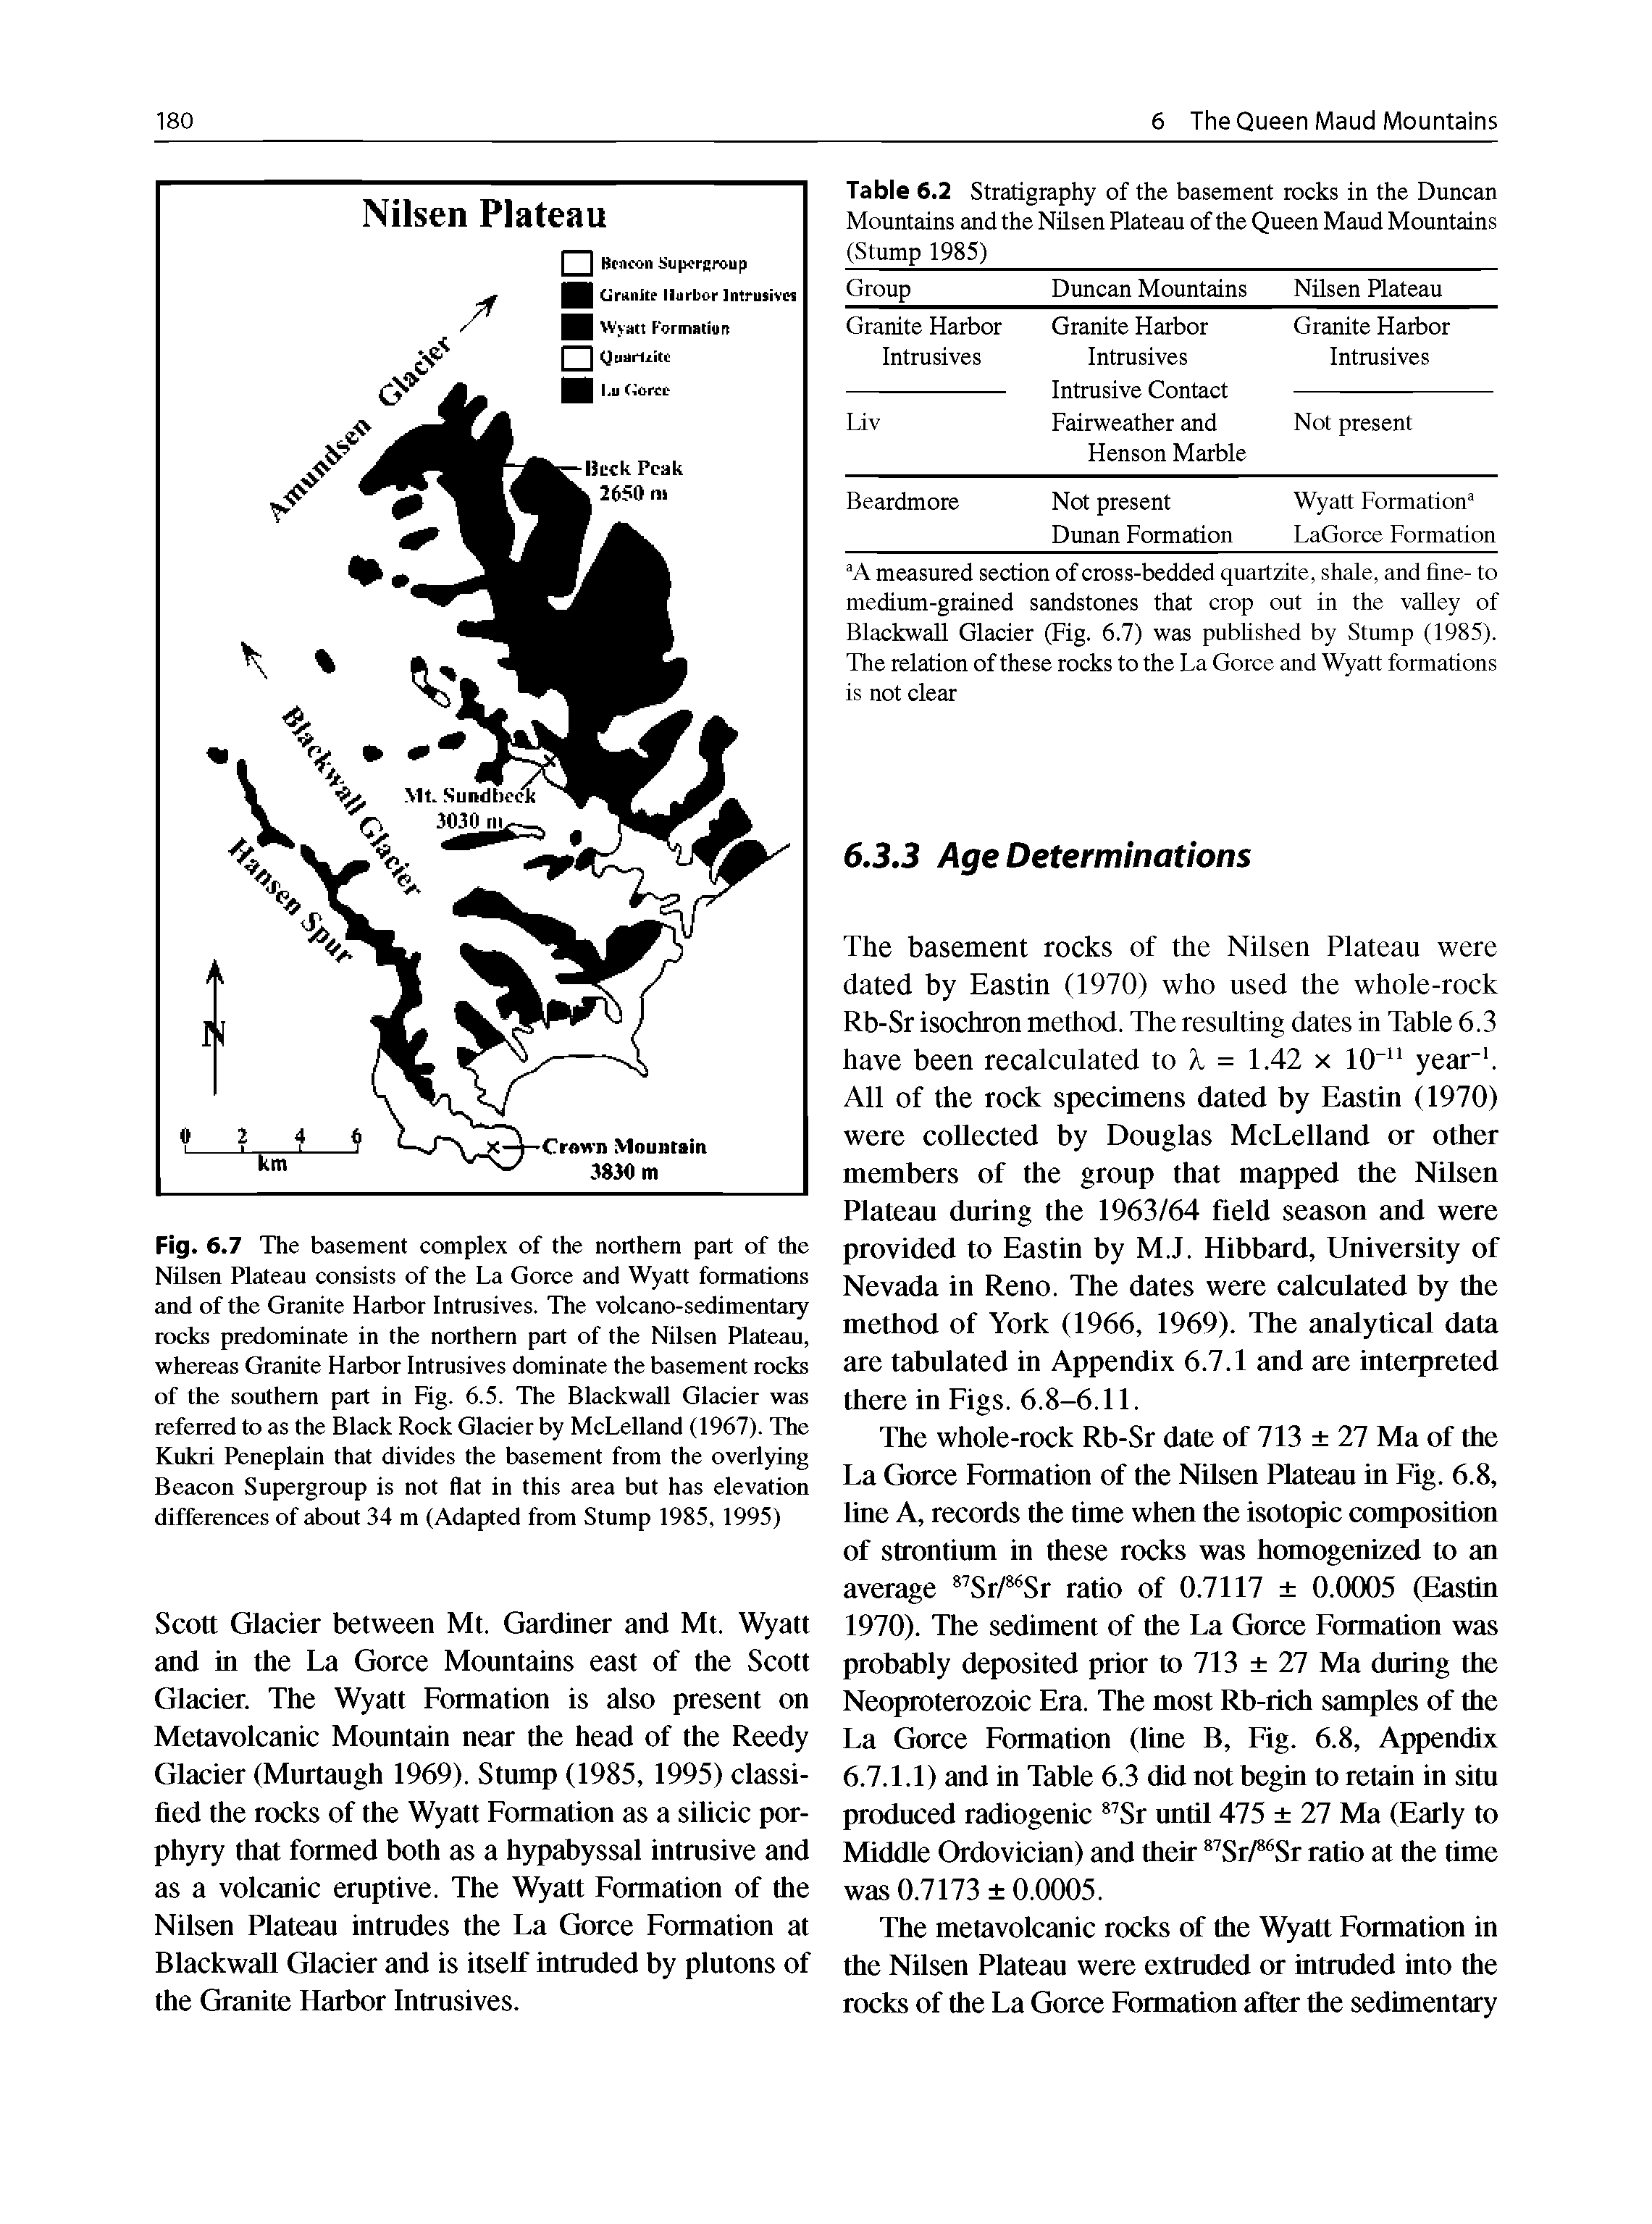 Fig. 6.7 The basement complex of the northern part of the Nilsen Plateau consists of the La Gorce and Wyatt formations and of the Granite Harbor Intrusives. The volcano-sedimentary rocks predominate in the northern part of the Nilsen Plateau, whereas Granite Harbor Intrusives dominate the basement rocks of the southern part in Fig. 6.5. The Blackwall Glacier was referred to as the Black Rock Glacier by McLelland (1967). The Kukri Peneplain that divides the basement from the overlying Beacon Supergroup is not flat in this area but has elevation differences of about 34 m (Adapted from Stump 1985, 1995)...